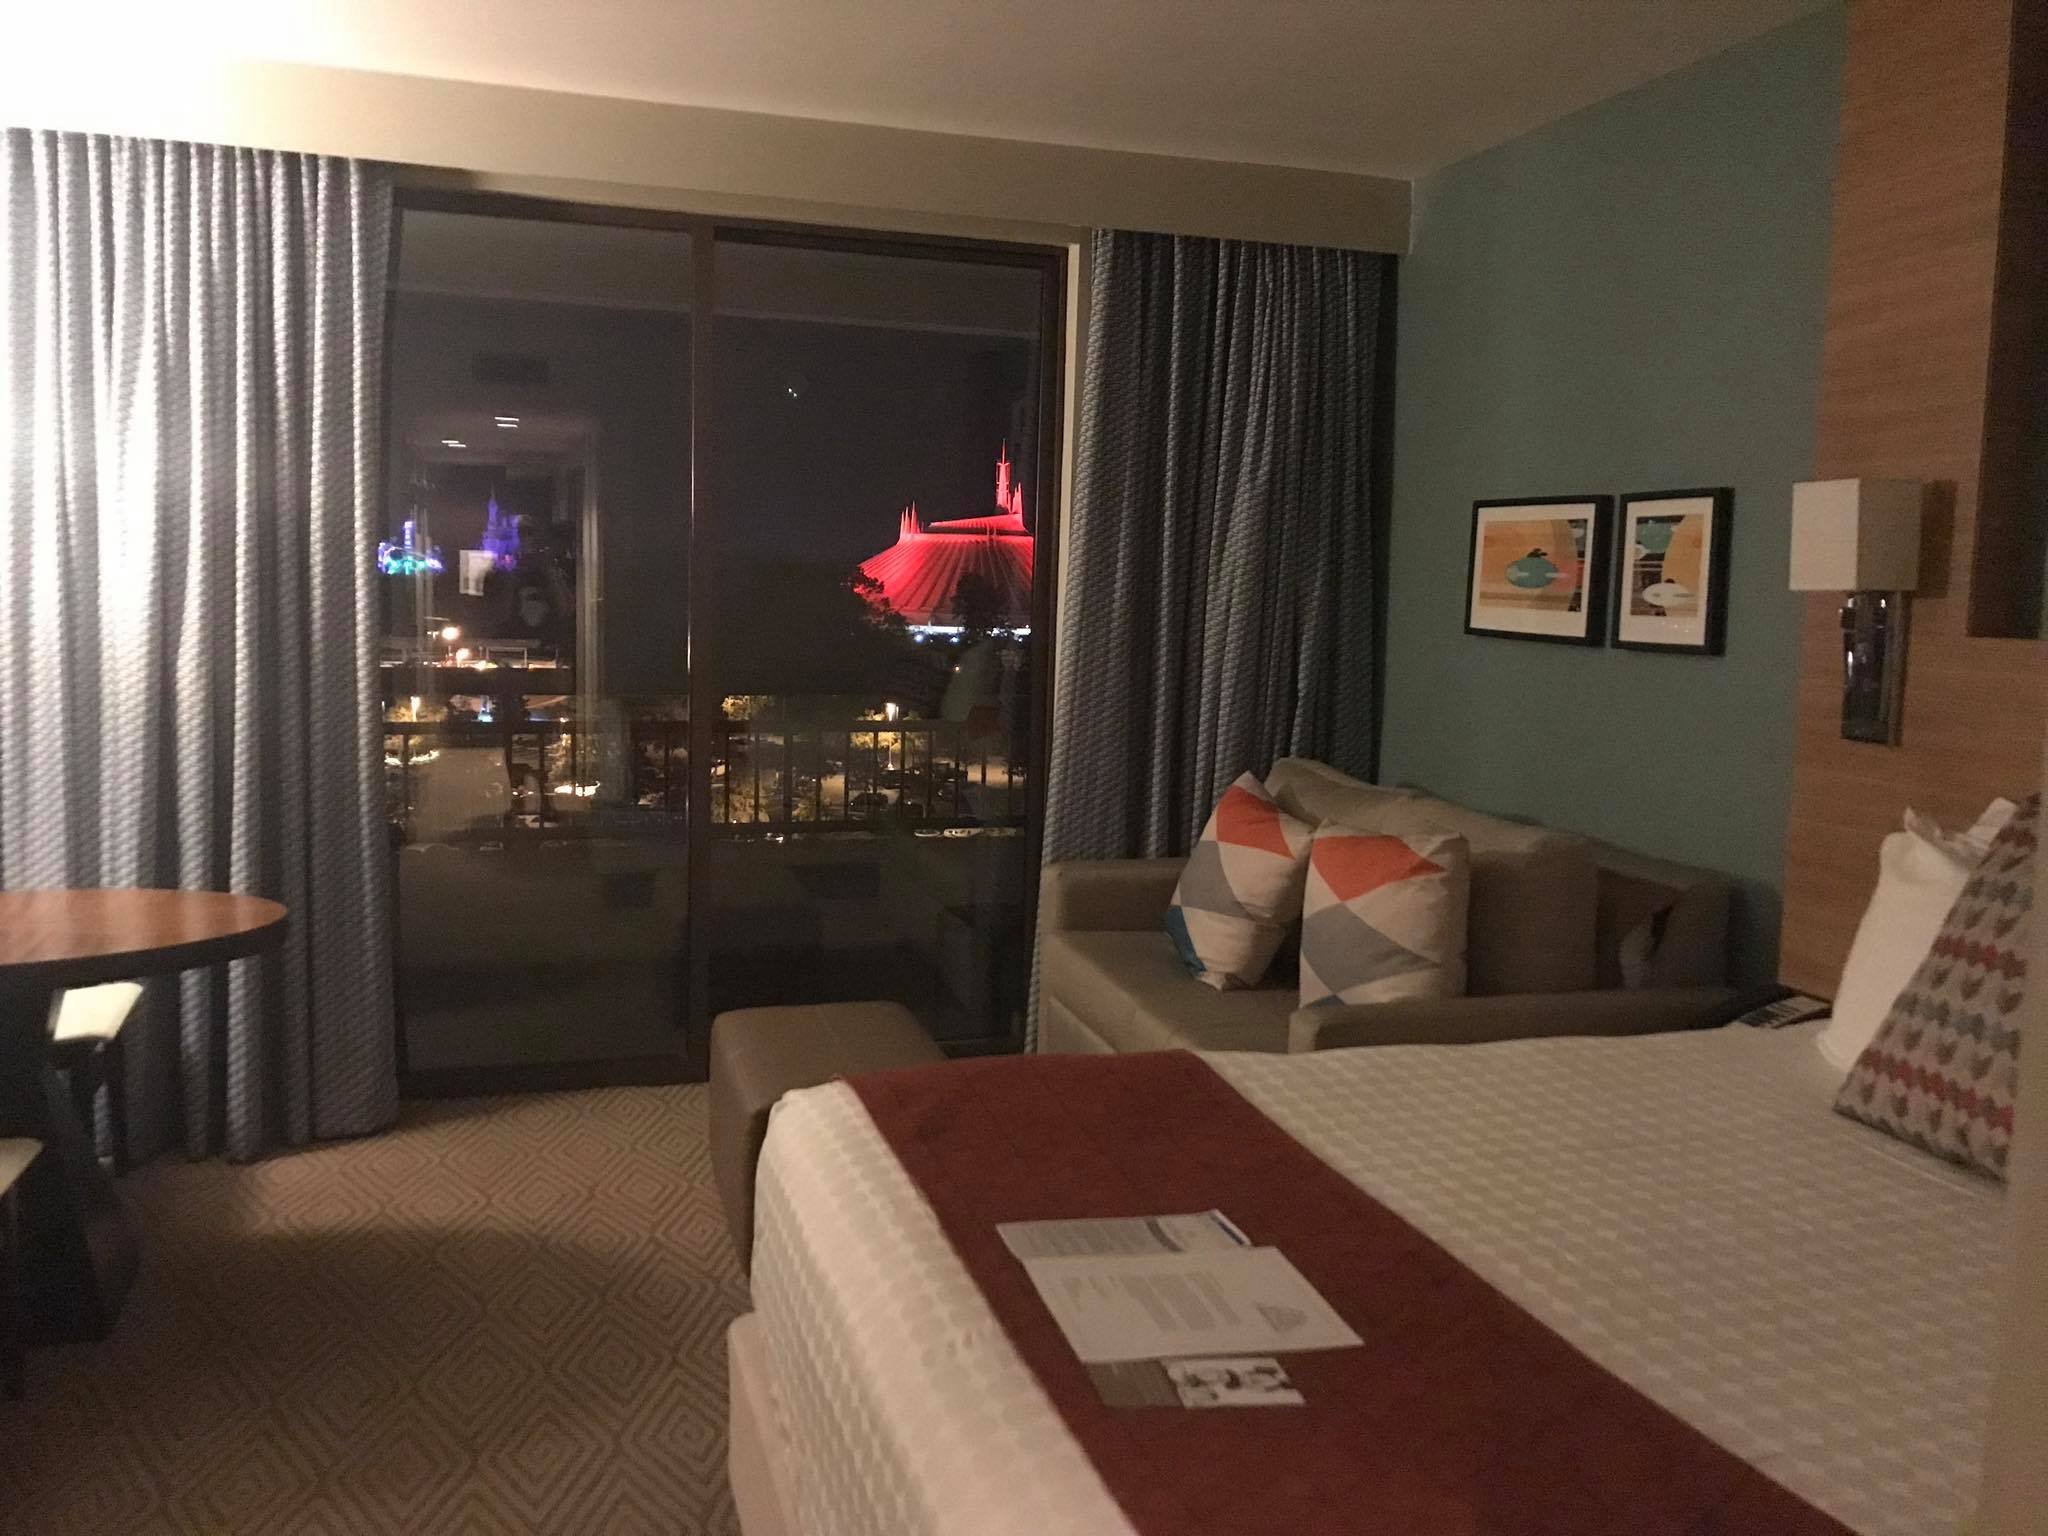 The Best Views For Your Points My Top Five Dvc Views That